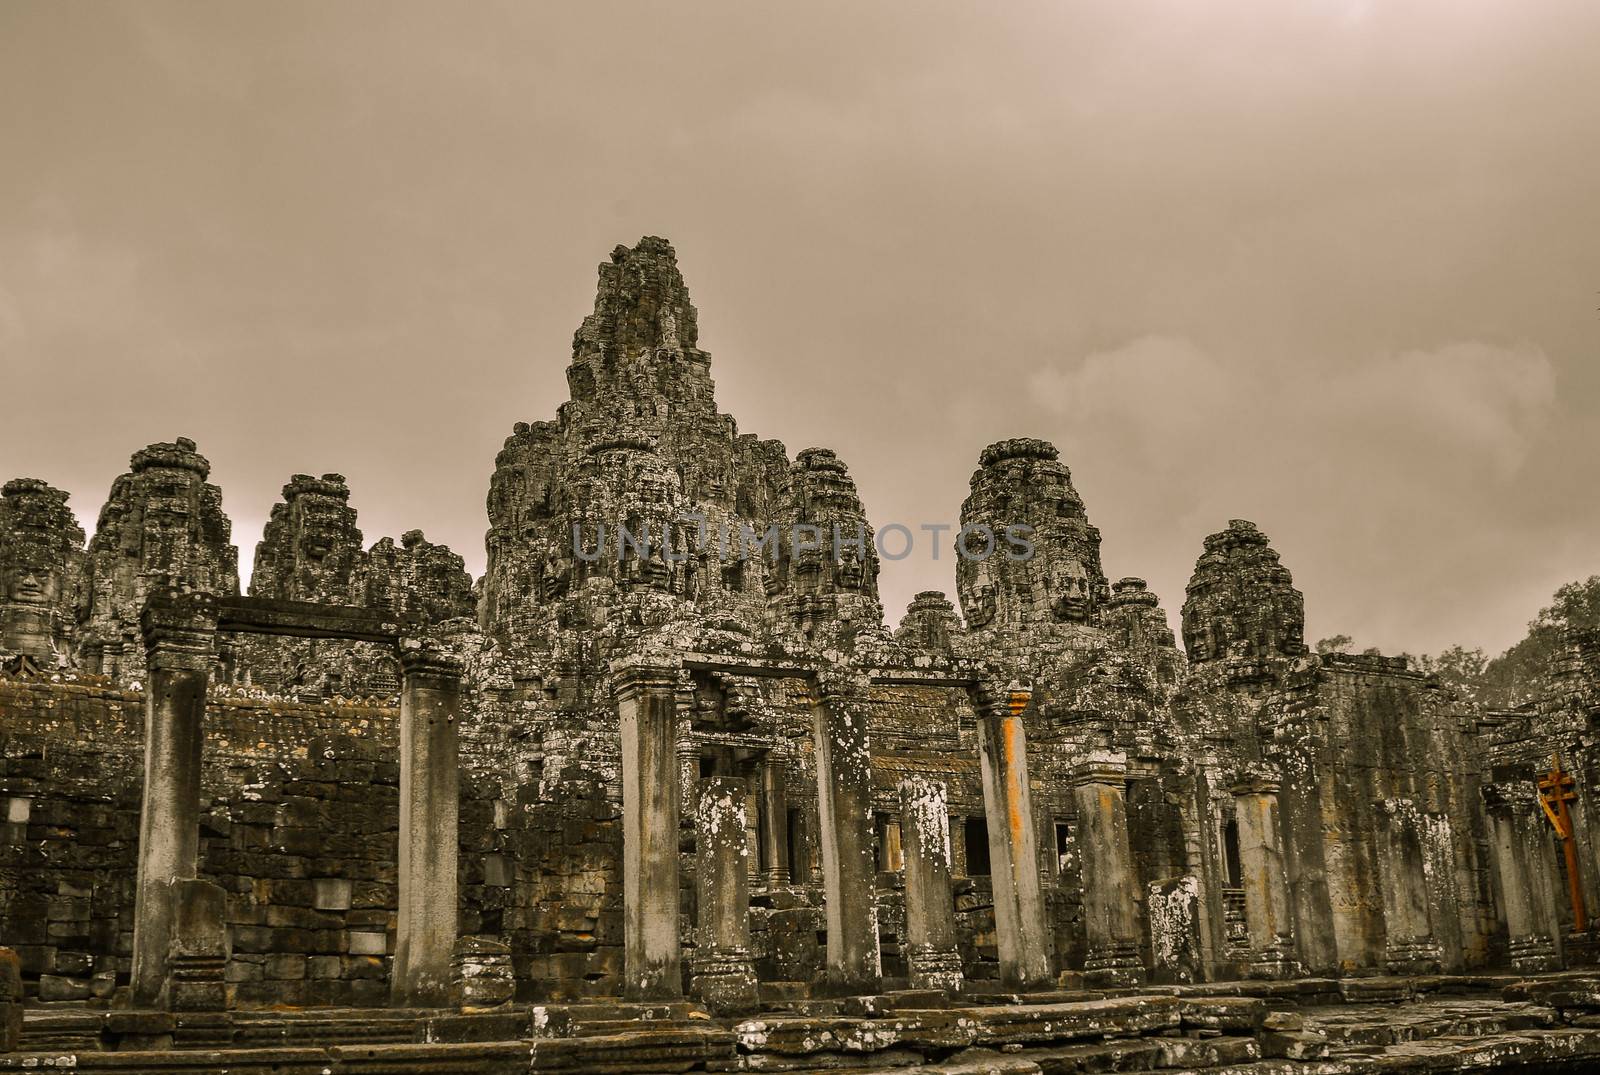 Bayon Temple and Angkor Wat Khmer Kingdom Religion complex in Siem Reap, Cambodia Asia